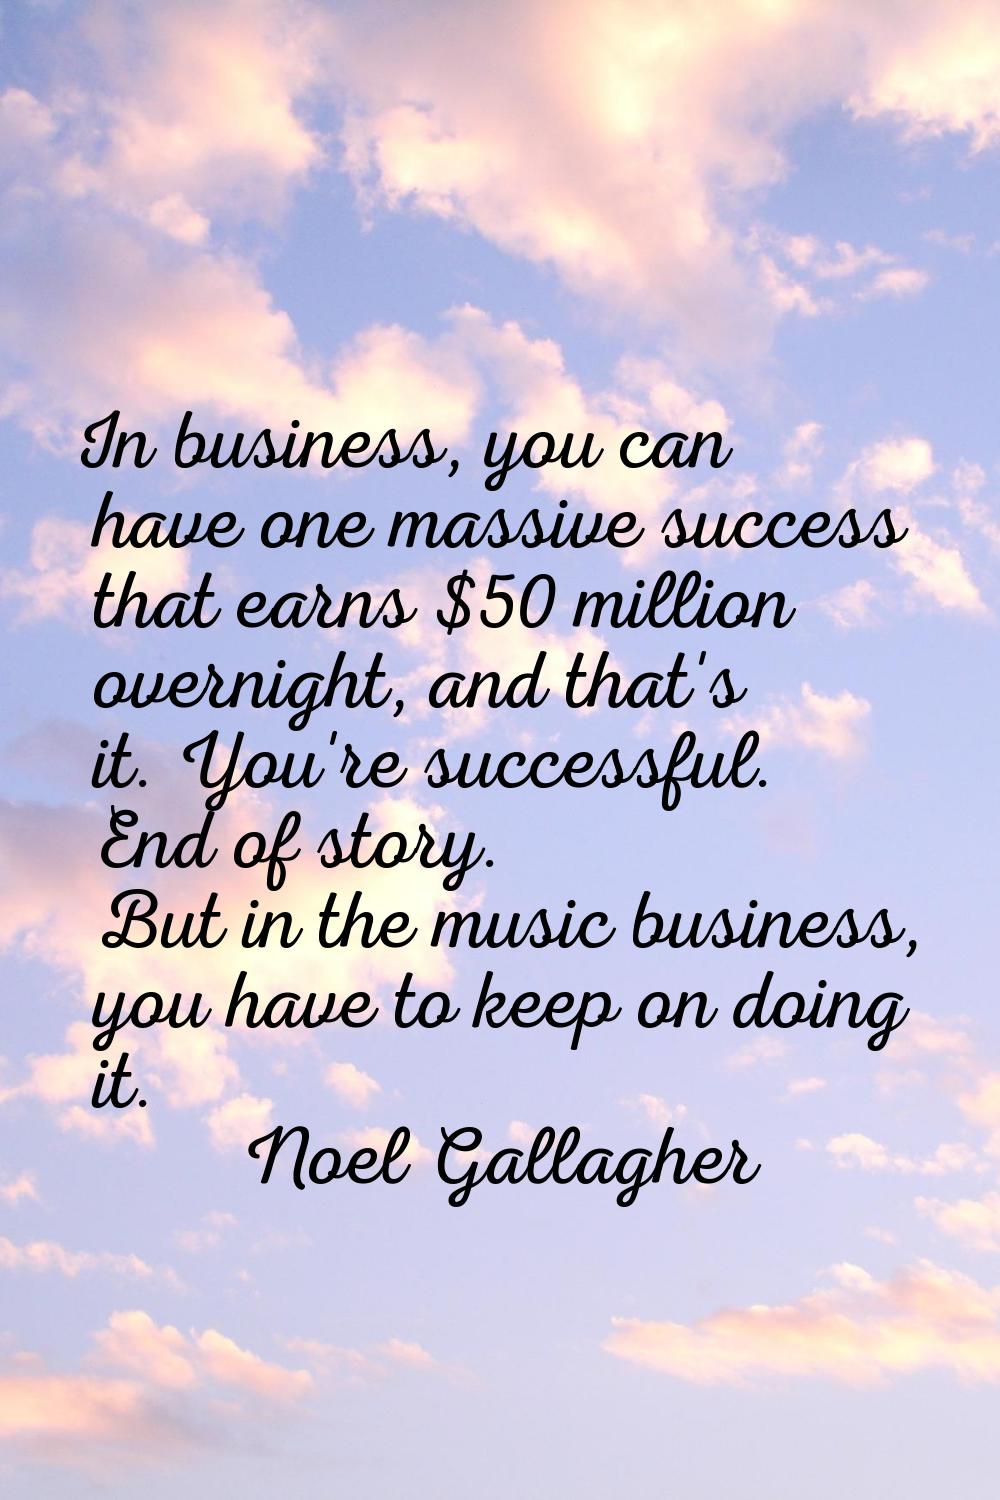 In business, you can have one massive success that earns $50 million overnight, and that's it. You'